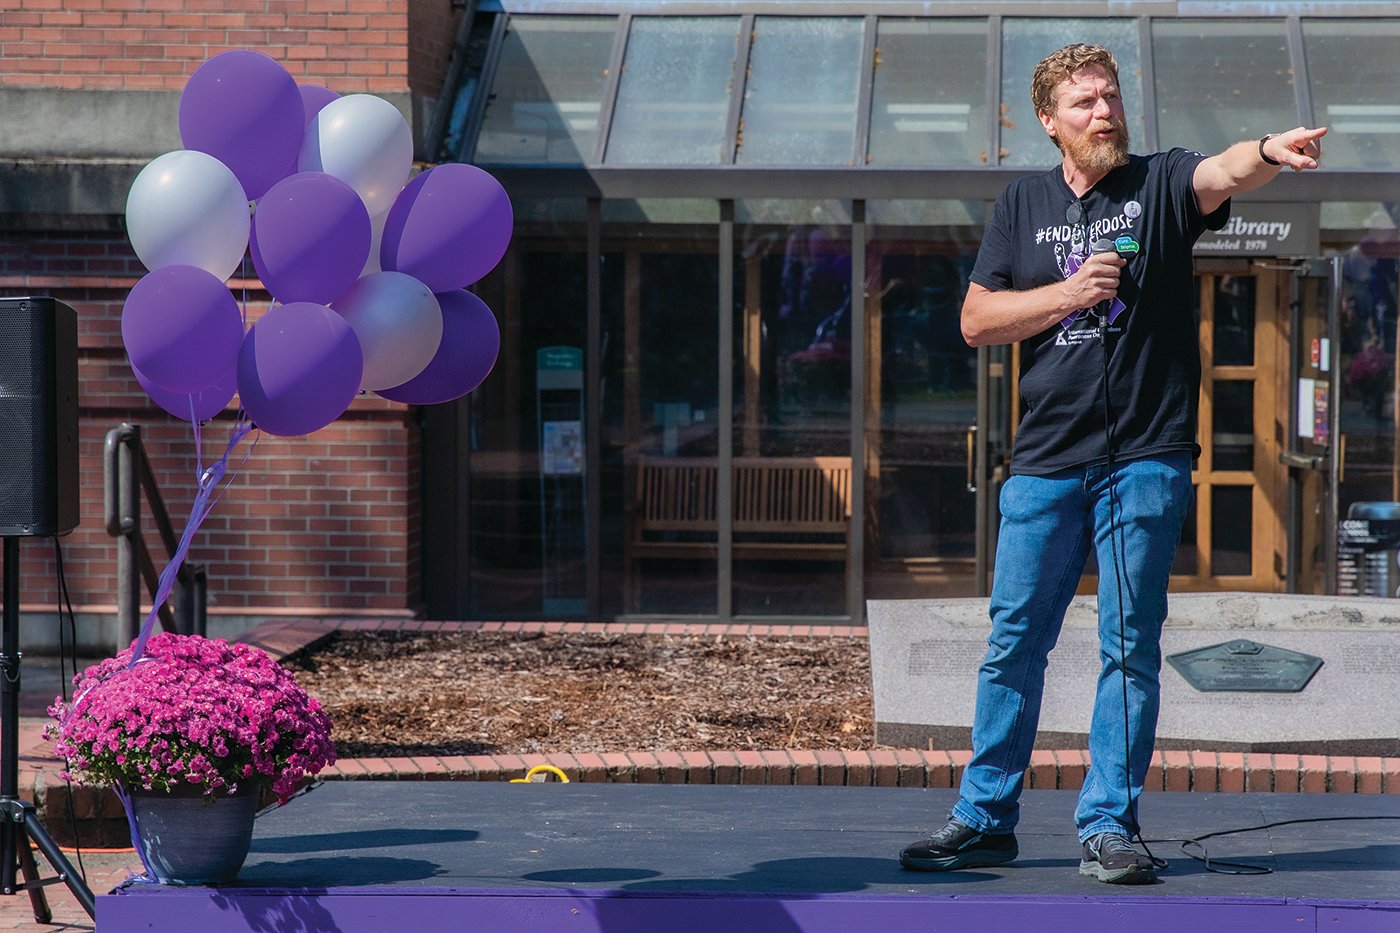 Gather Church Pastor Cole Meckle points and names resource groups in attendance at George Washington Park in Centralia during an overdose awareness event on Wednesday.